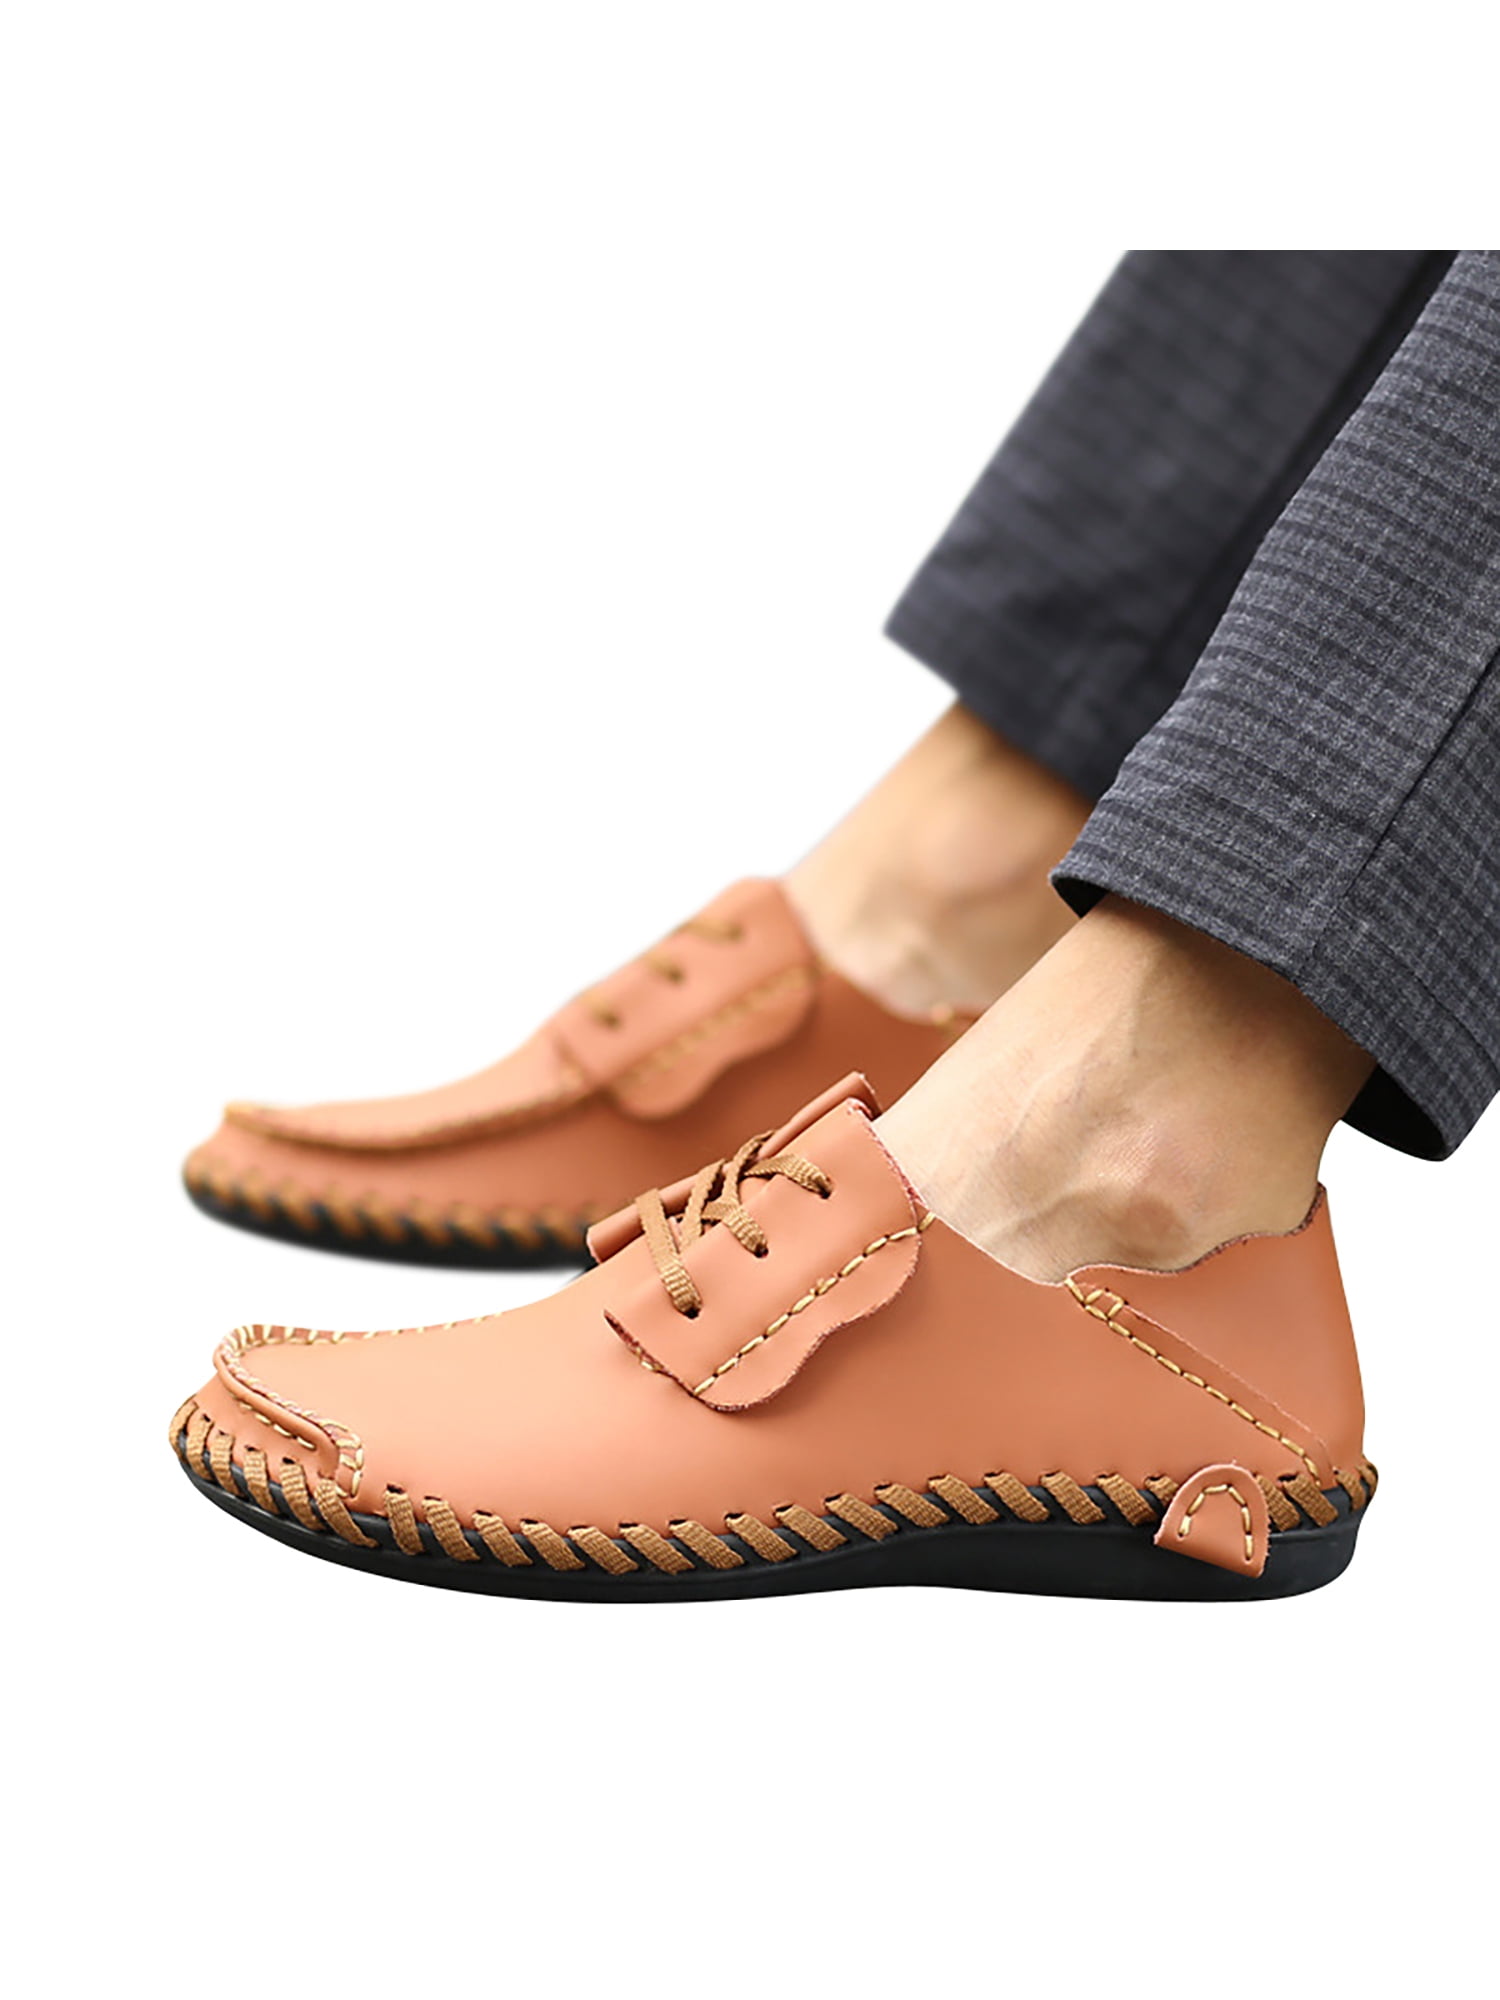 Color : Beige, Size : 8.5 M US Mens Flat Sport Shoes Casual PU Leather Loafers Low Top Strong Outsole,Very Stylish